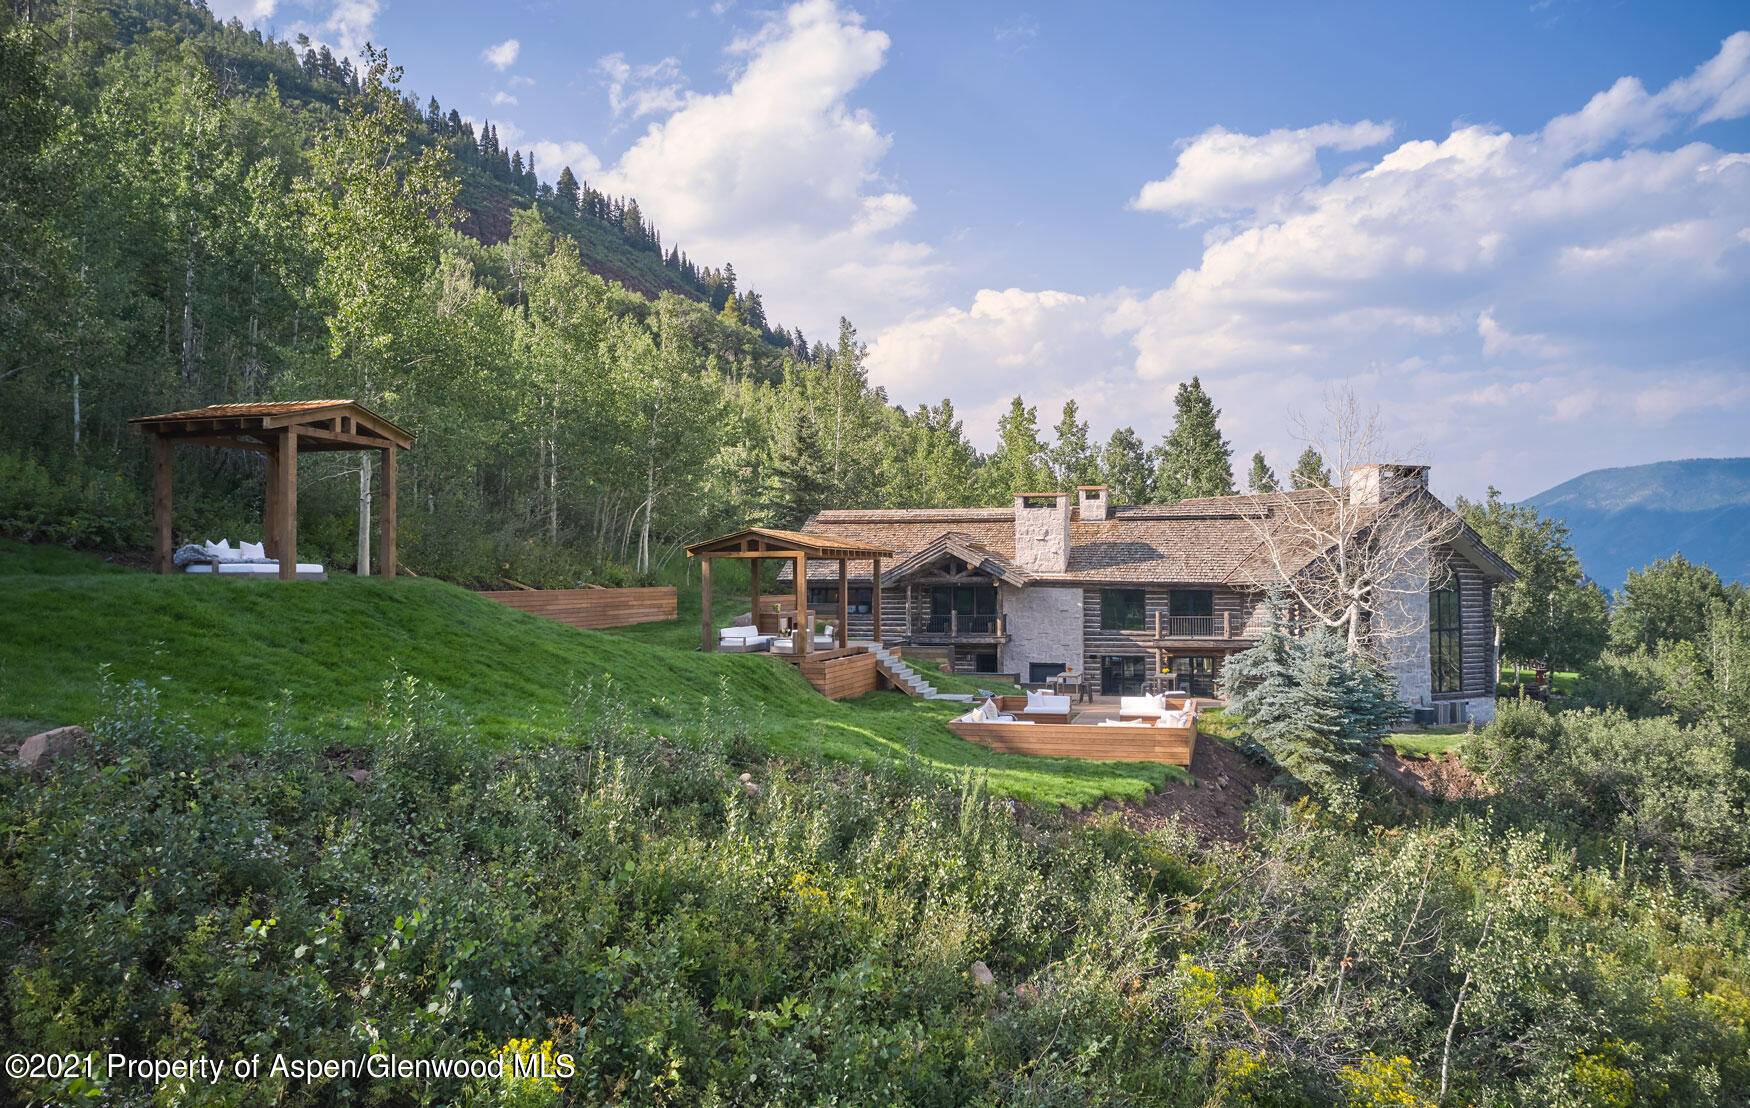 Atop Castle Creek dominating the valley in Aspen, sits a new family compound.